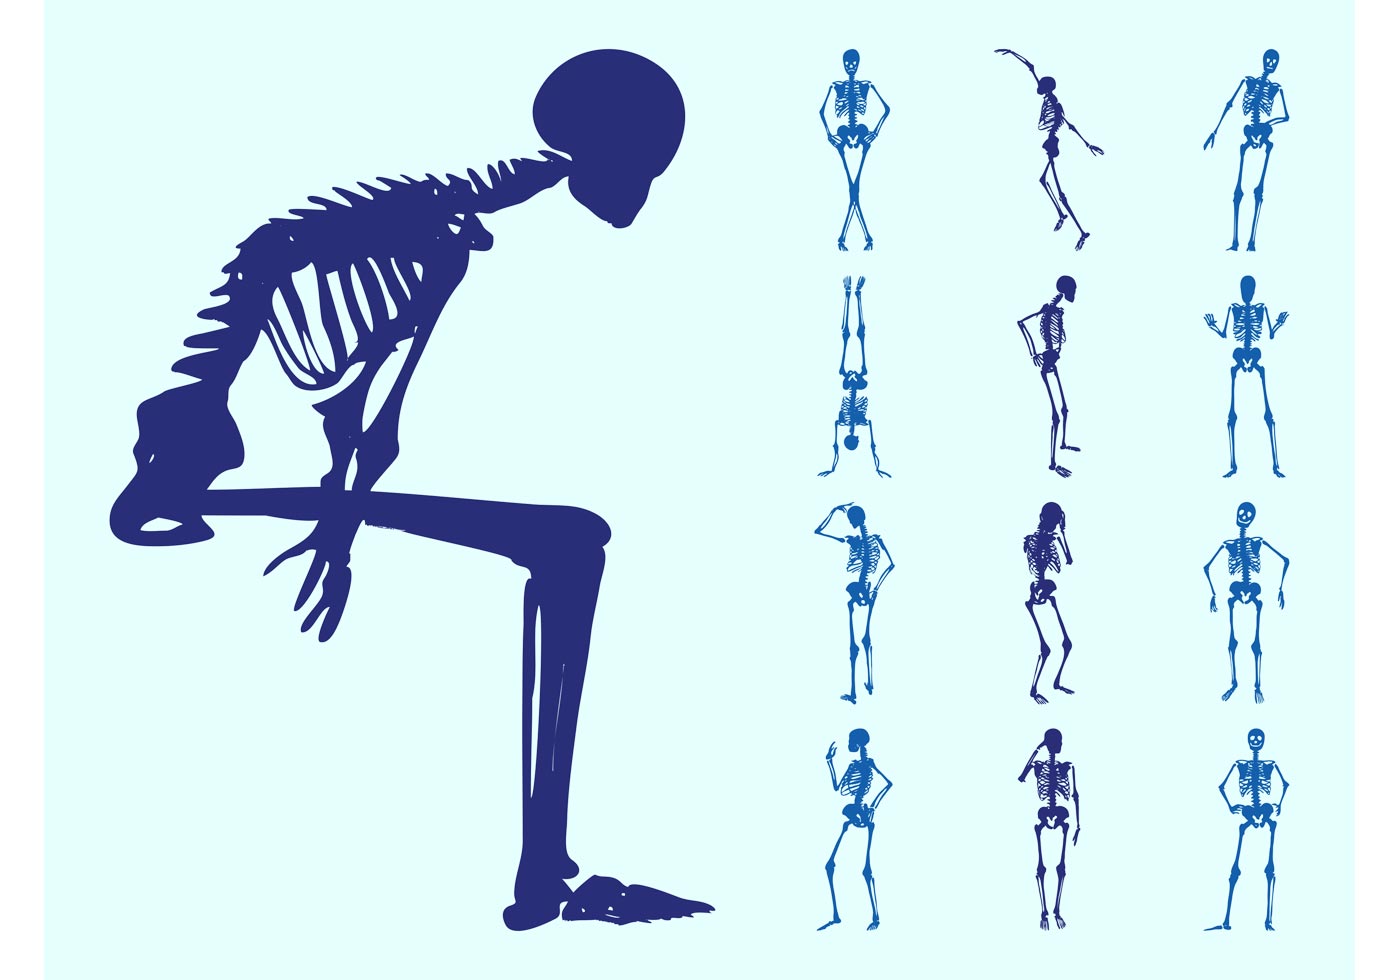 Human Skeletons Silhouettes - Download Free Vector Art, Stock Graphics